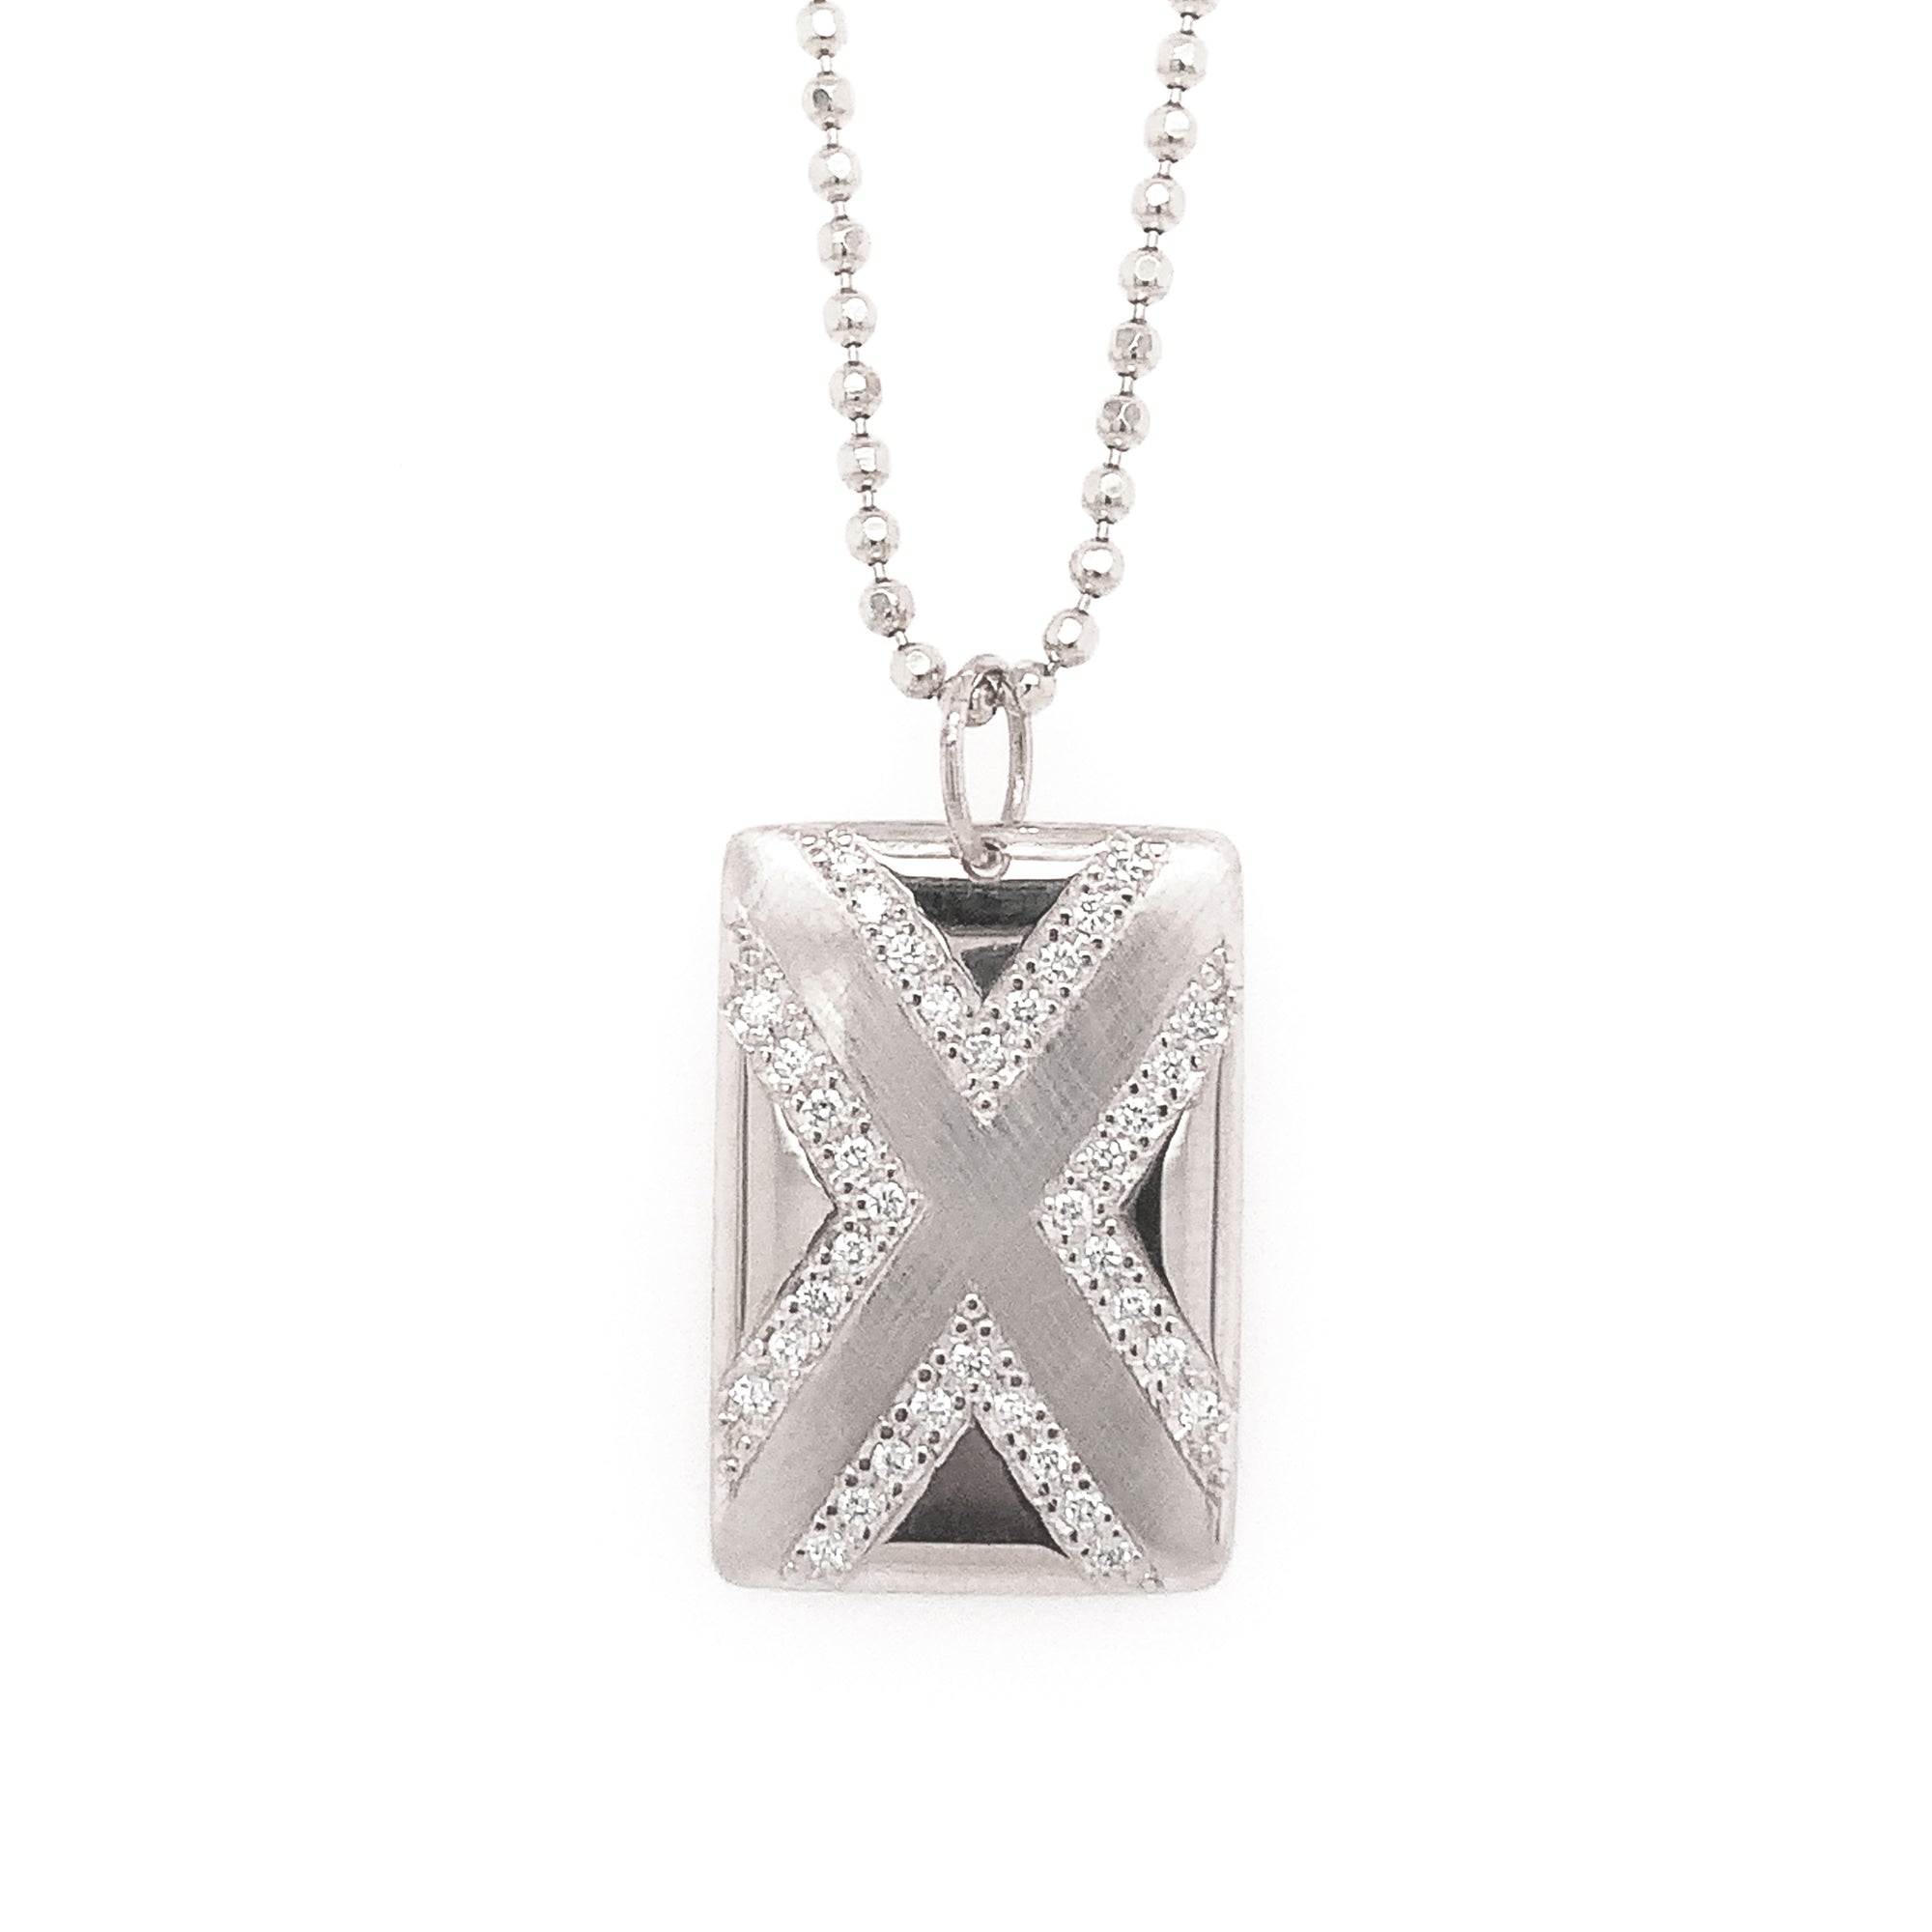 14k white gold medium CAXX pendant with complimenting shiny and satin finish and "X" shape in white diamonds